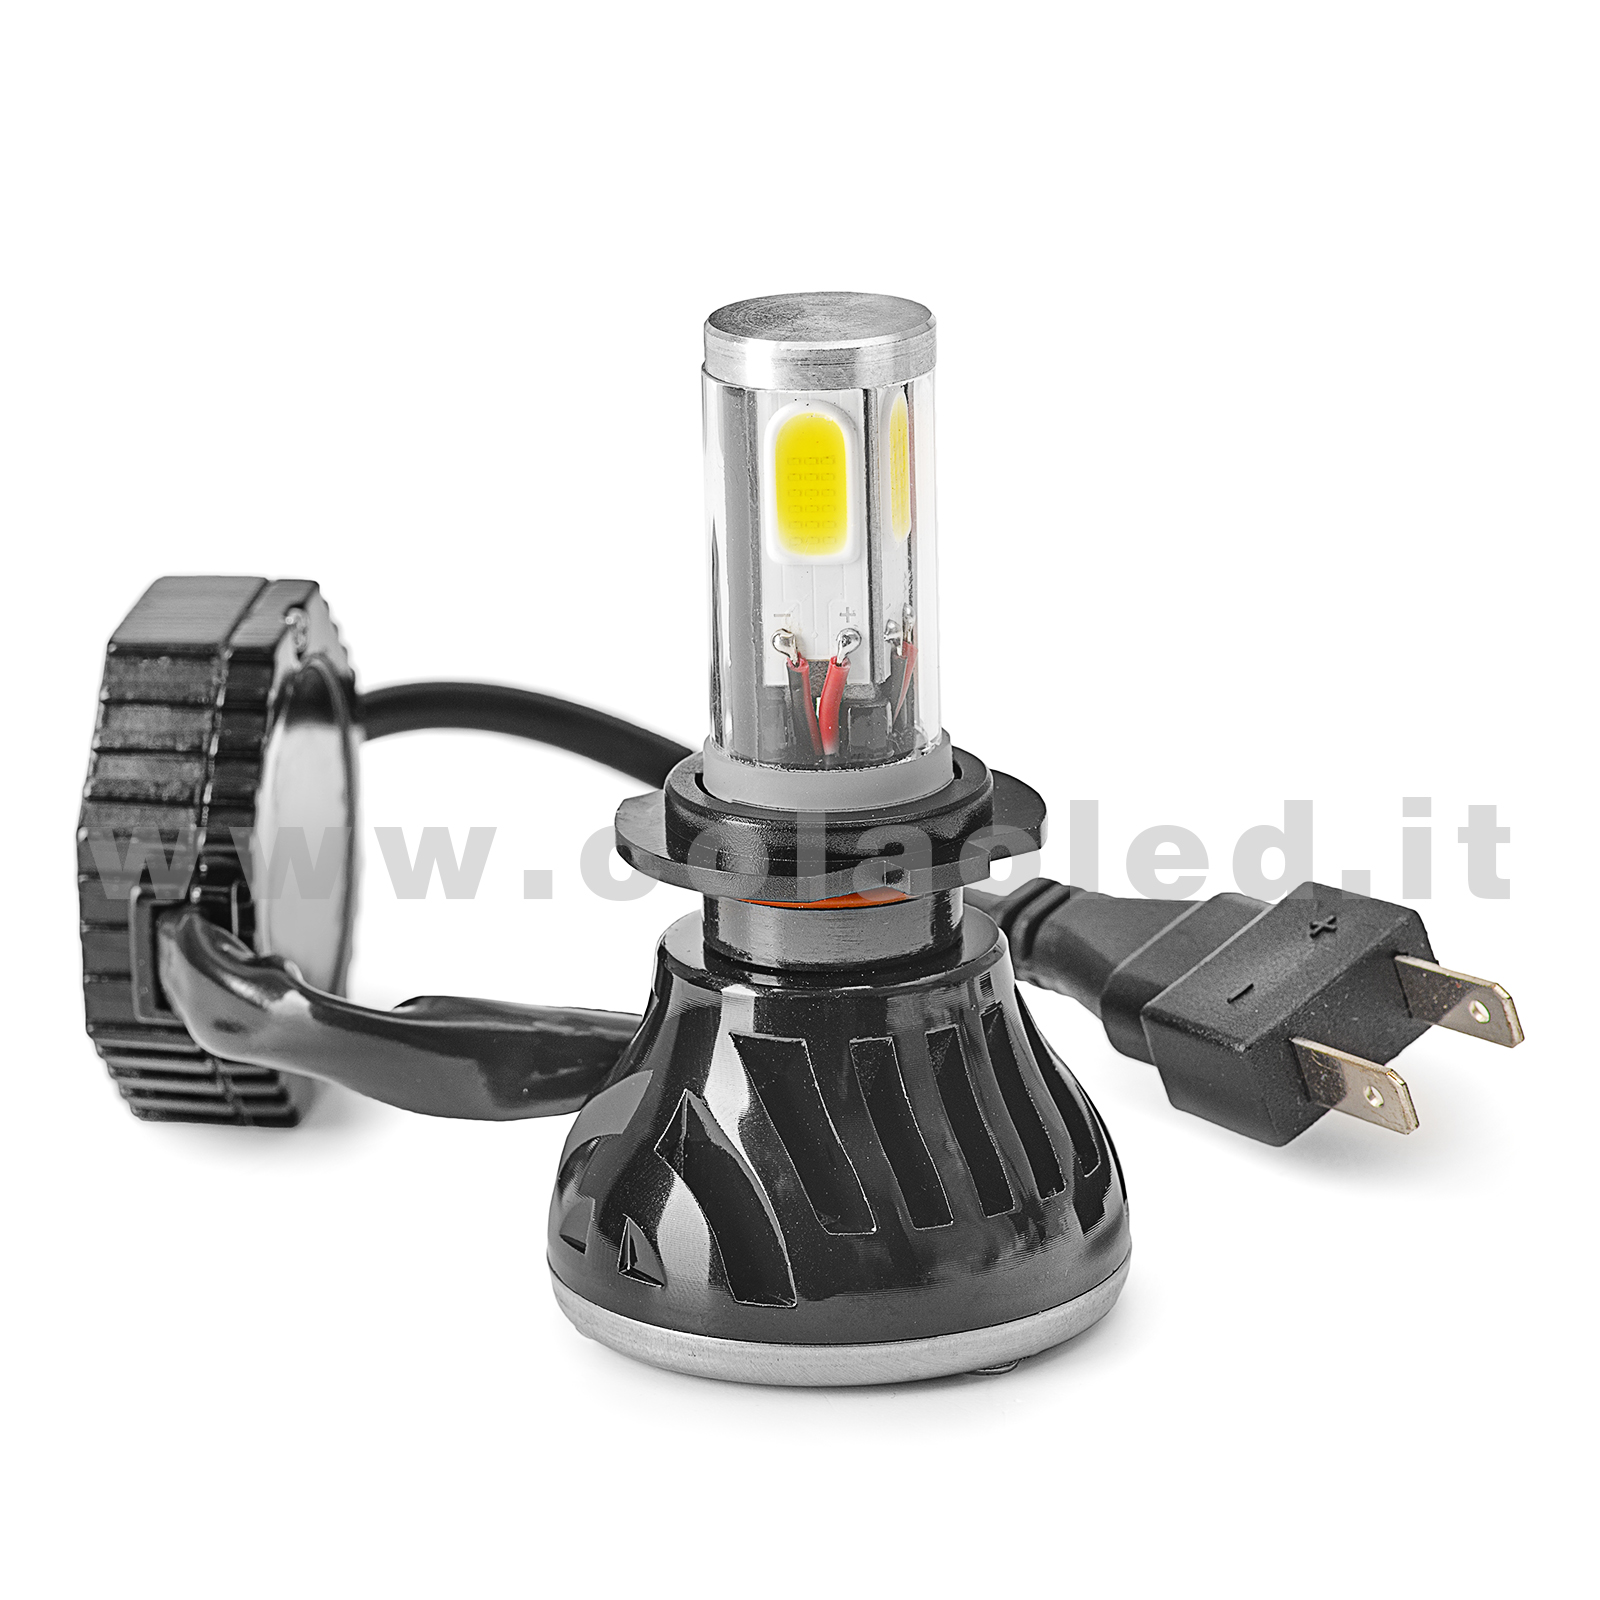 H7 CANBUS KIT LED 1 LAMPADA 9000LM SCELTA POWER 40W CON